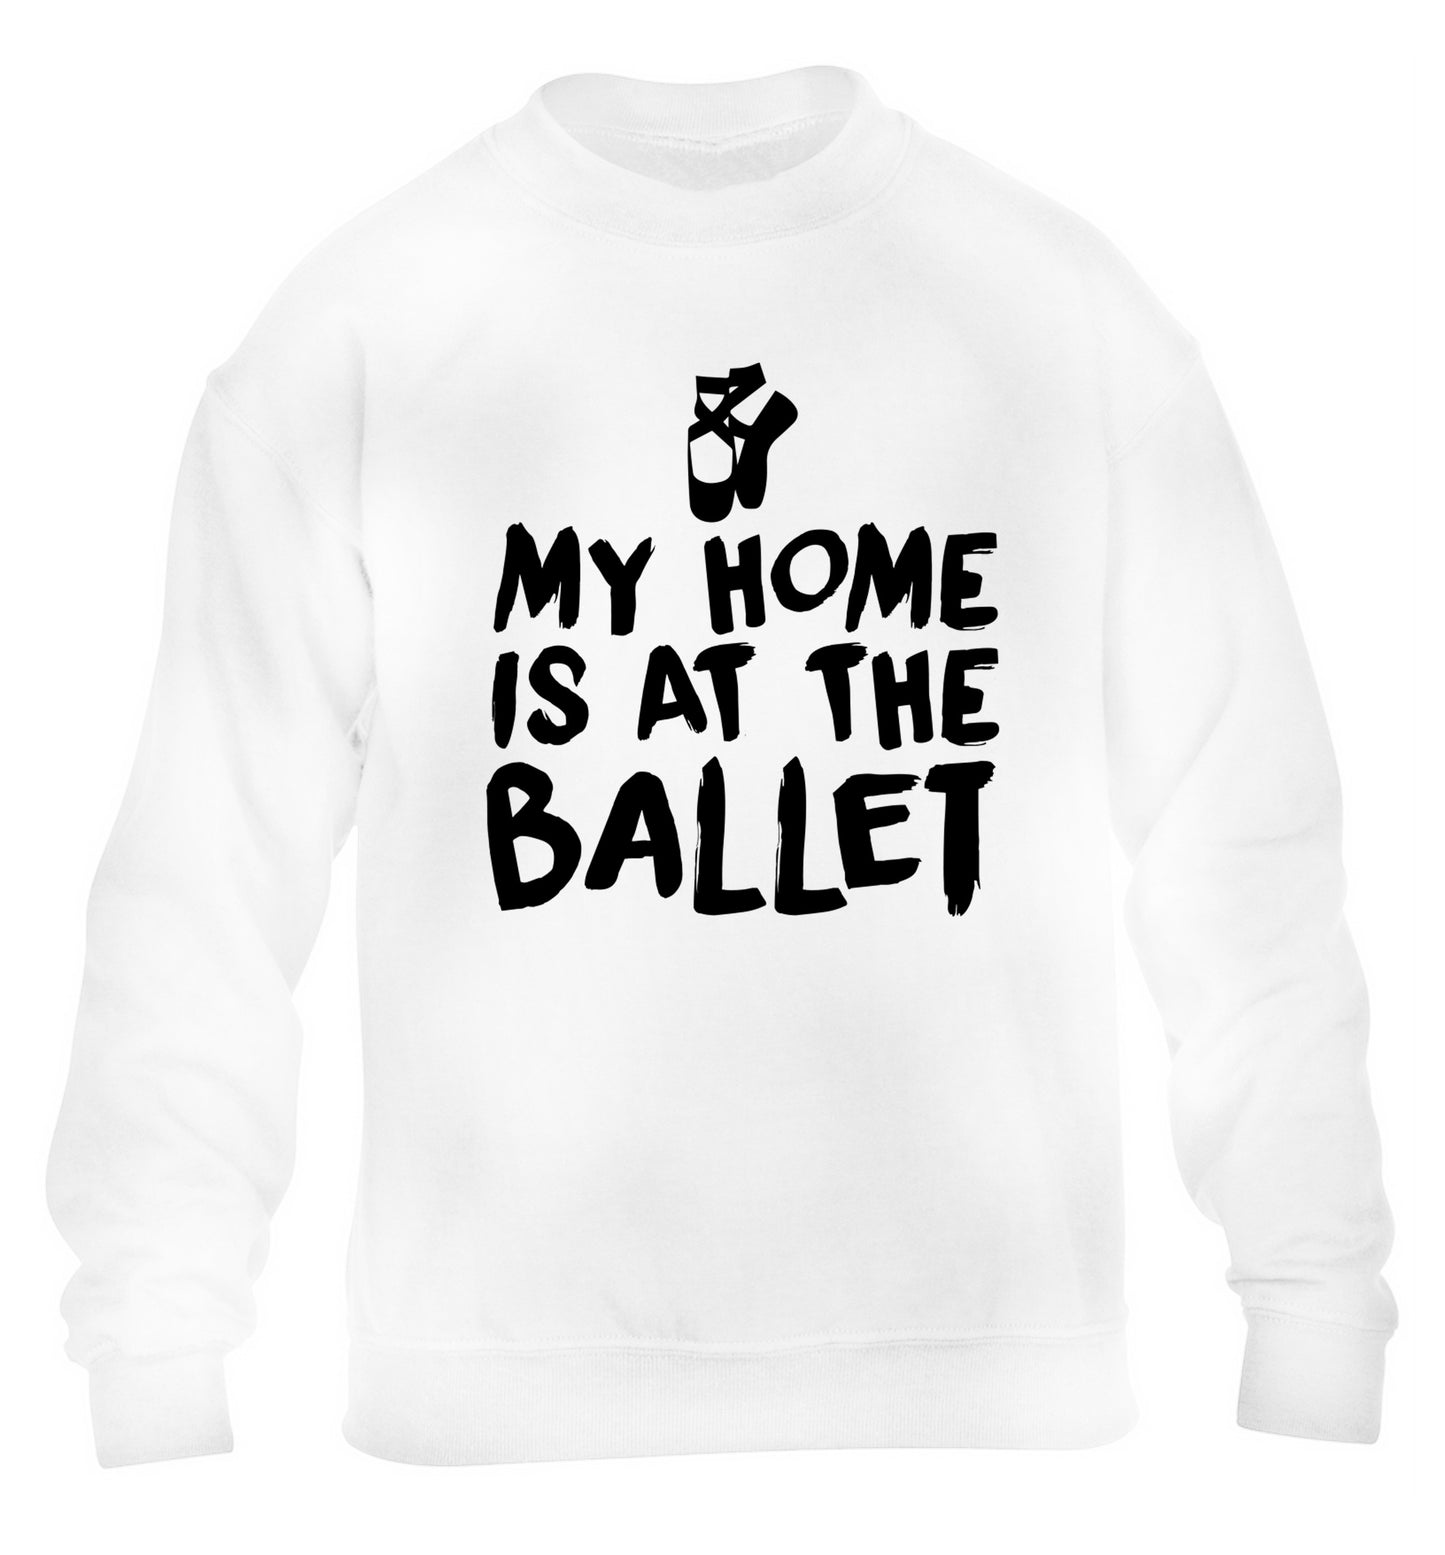 My home is at the ballet children's white sweater 12-14 Years